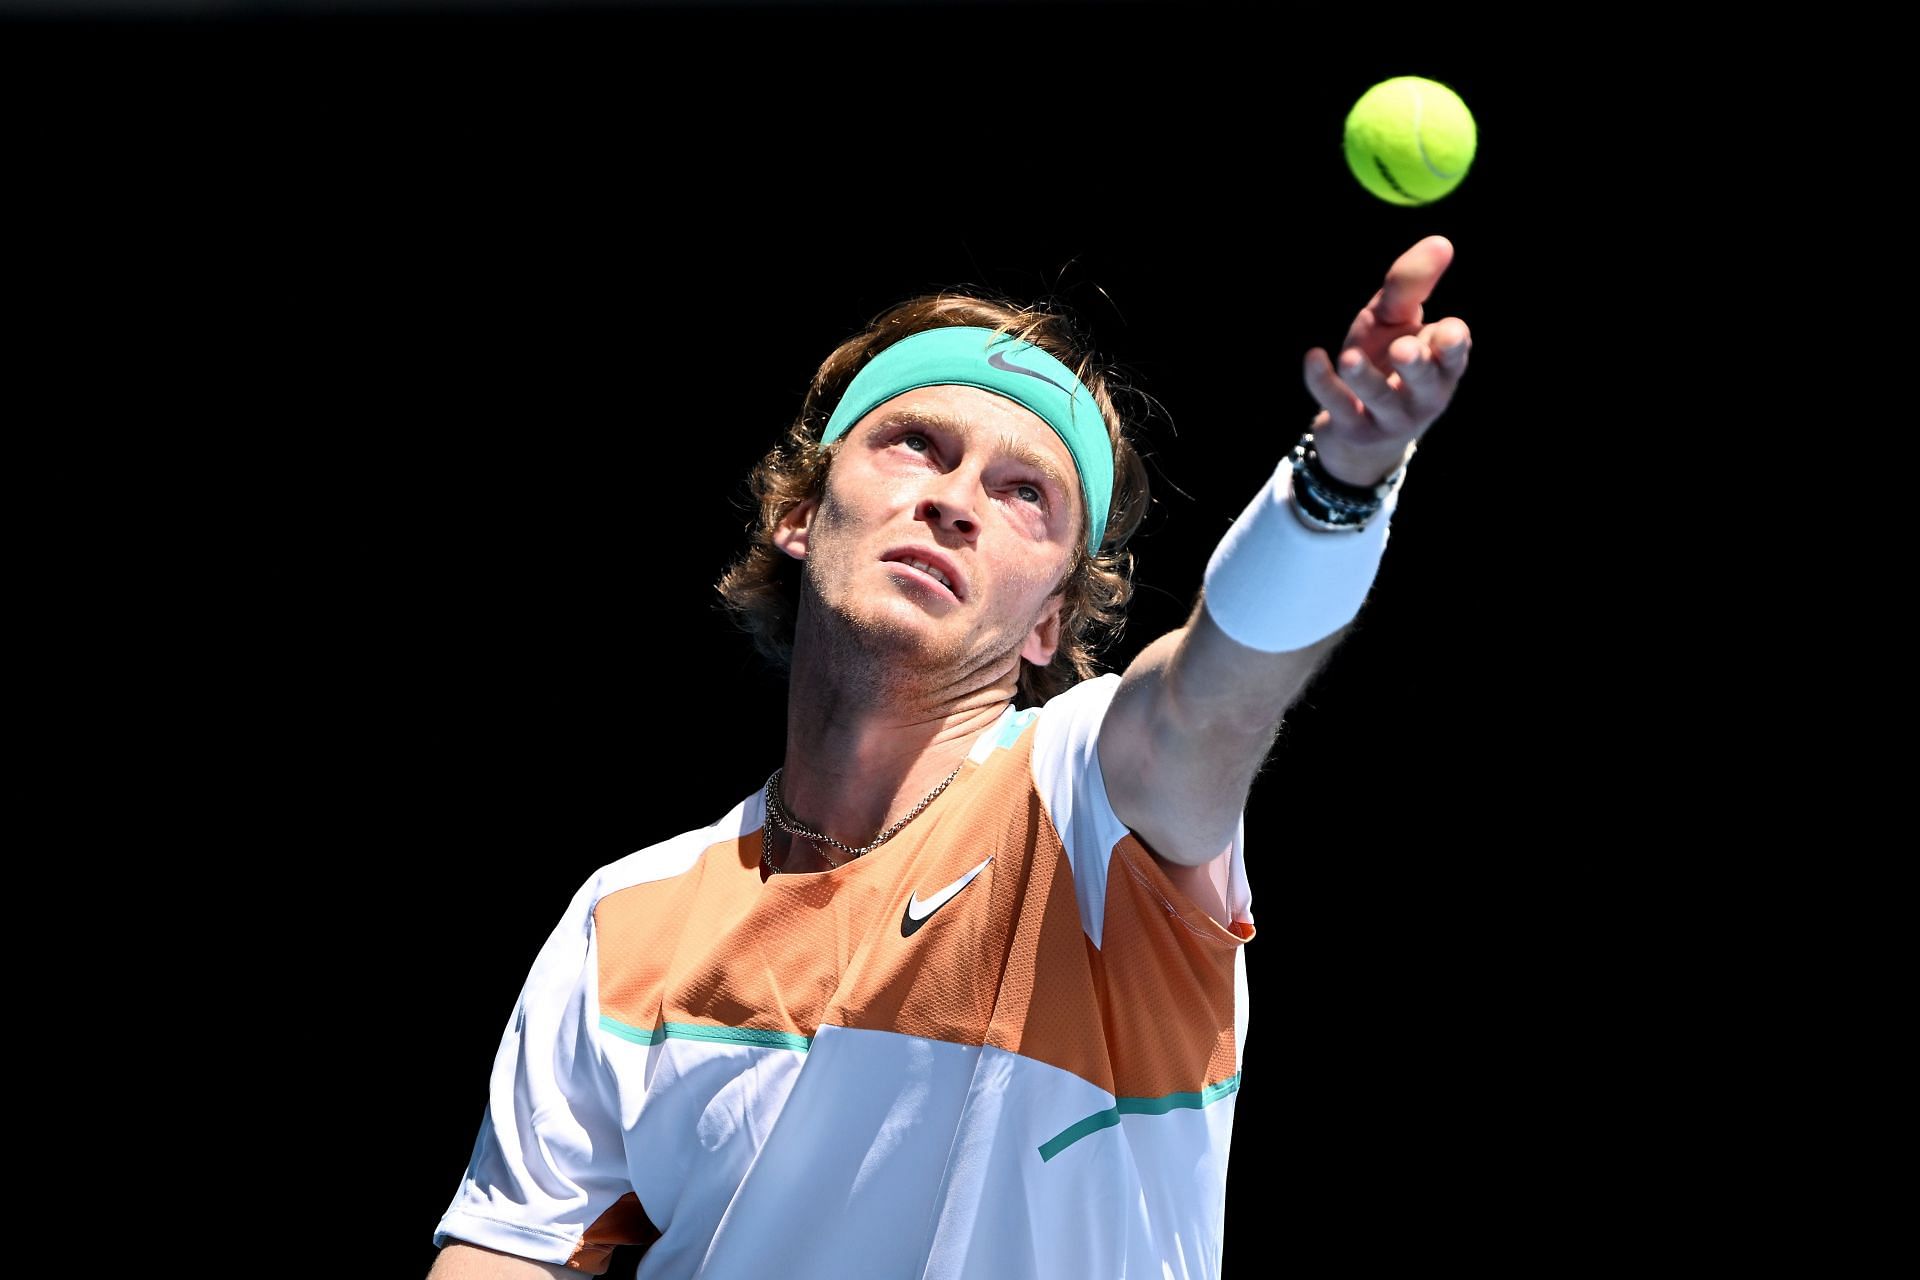 Rublev is among the favorites for the Rotterdam Open